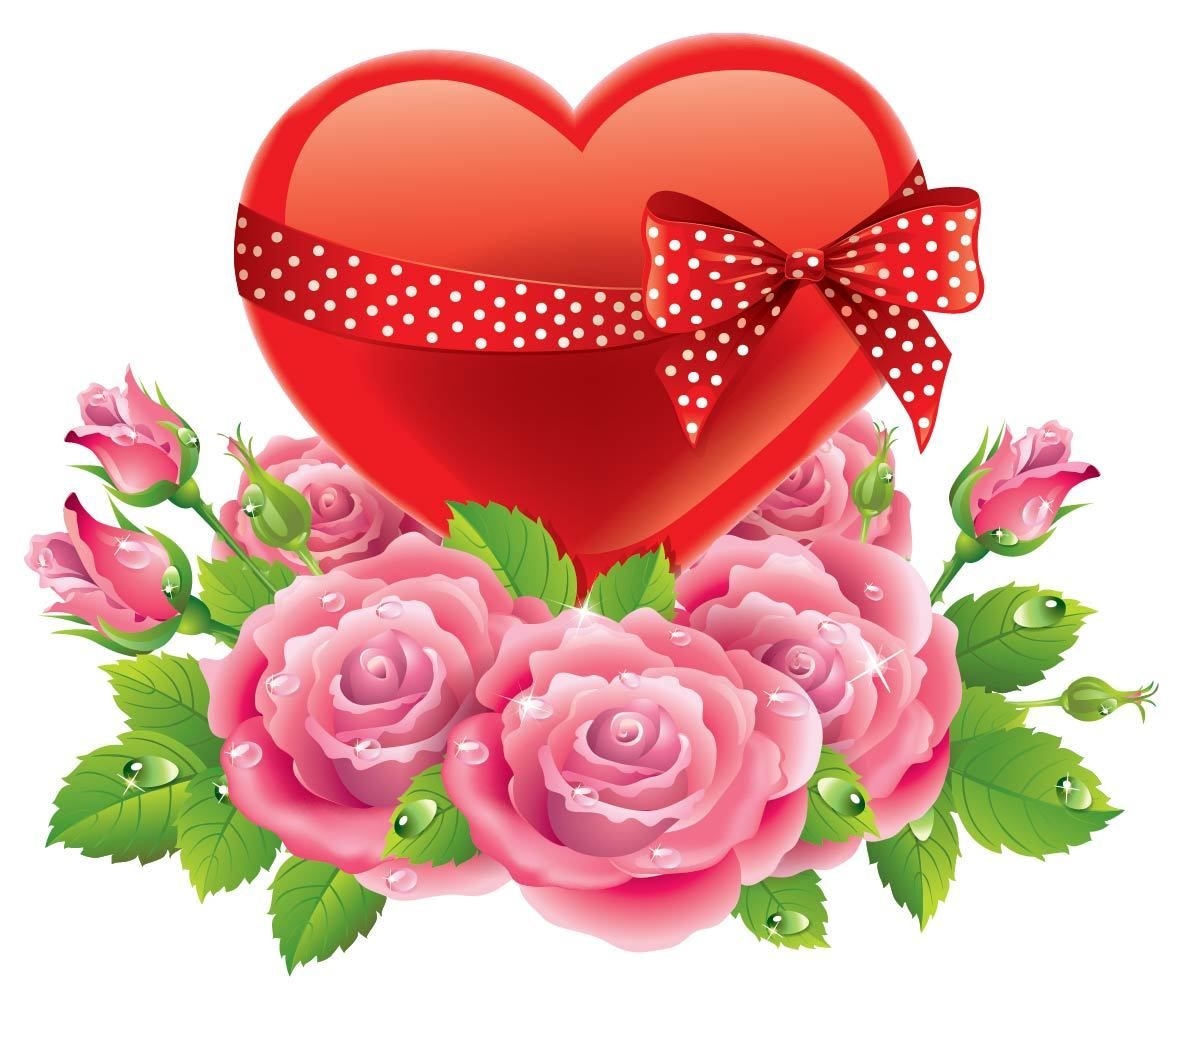 Ribbon Heart Roses Valentine Background - Vector download